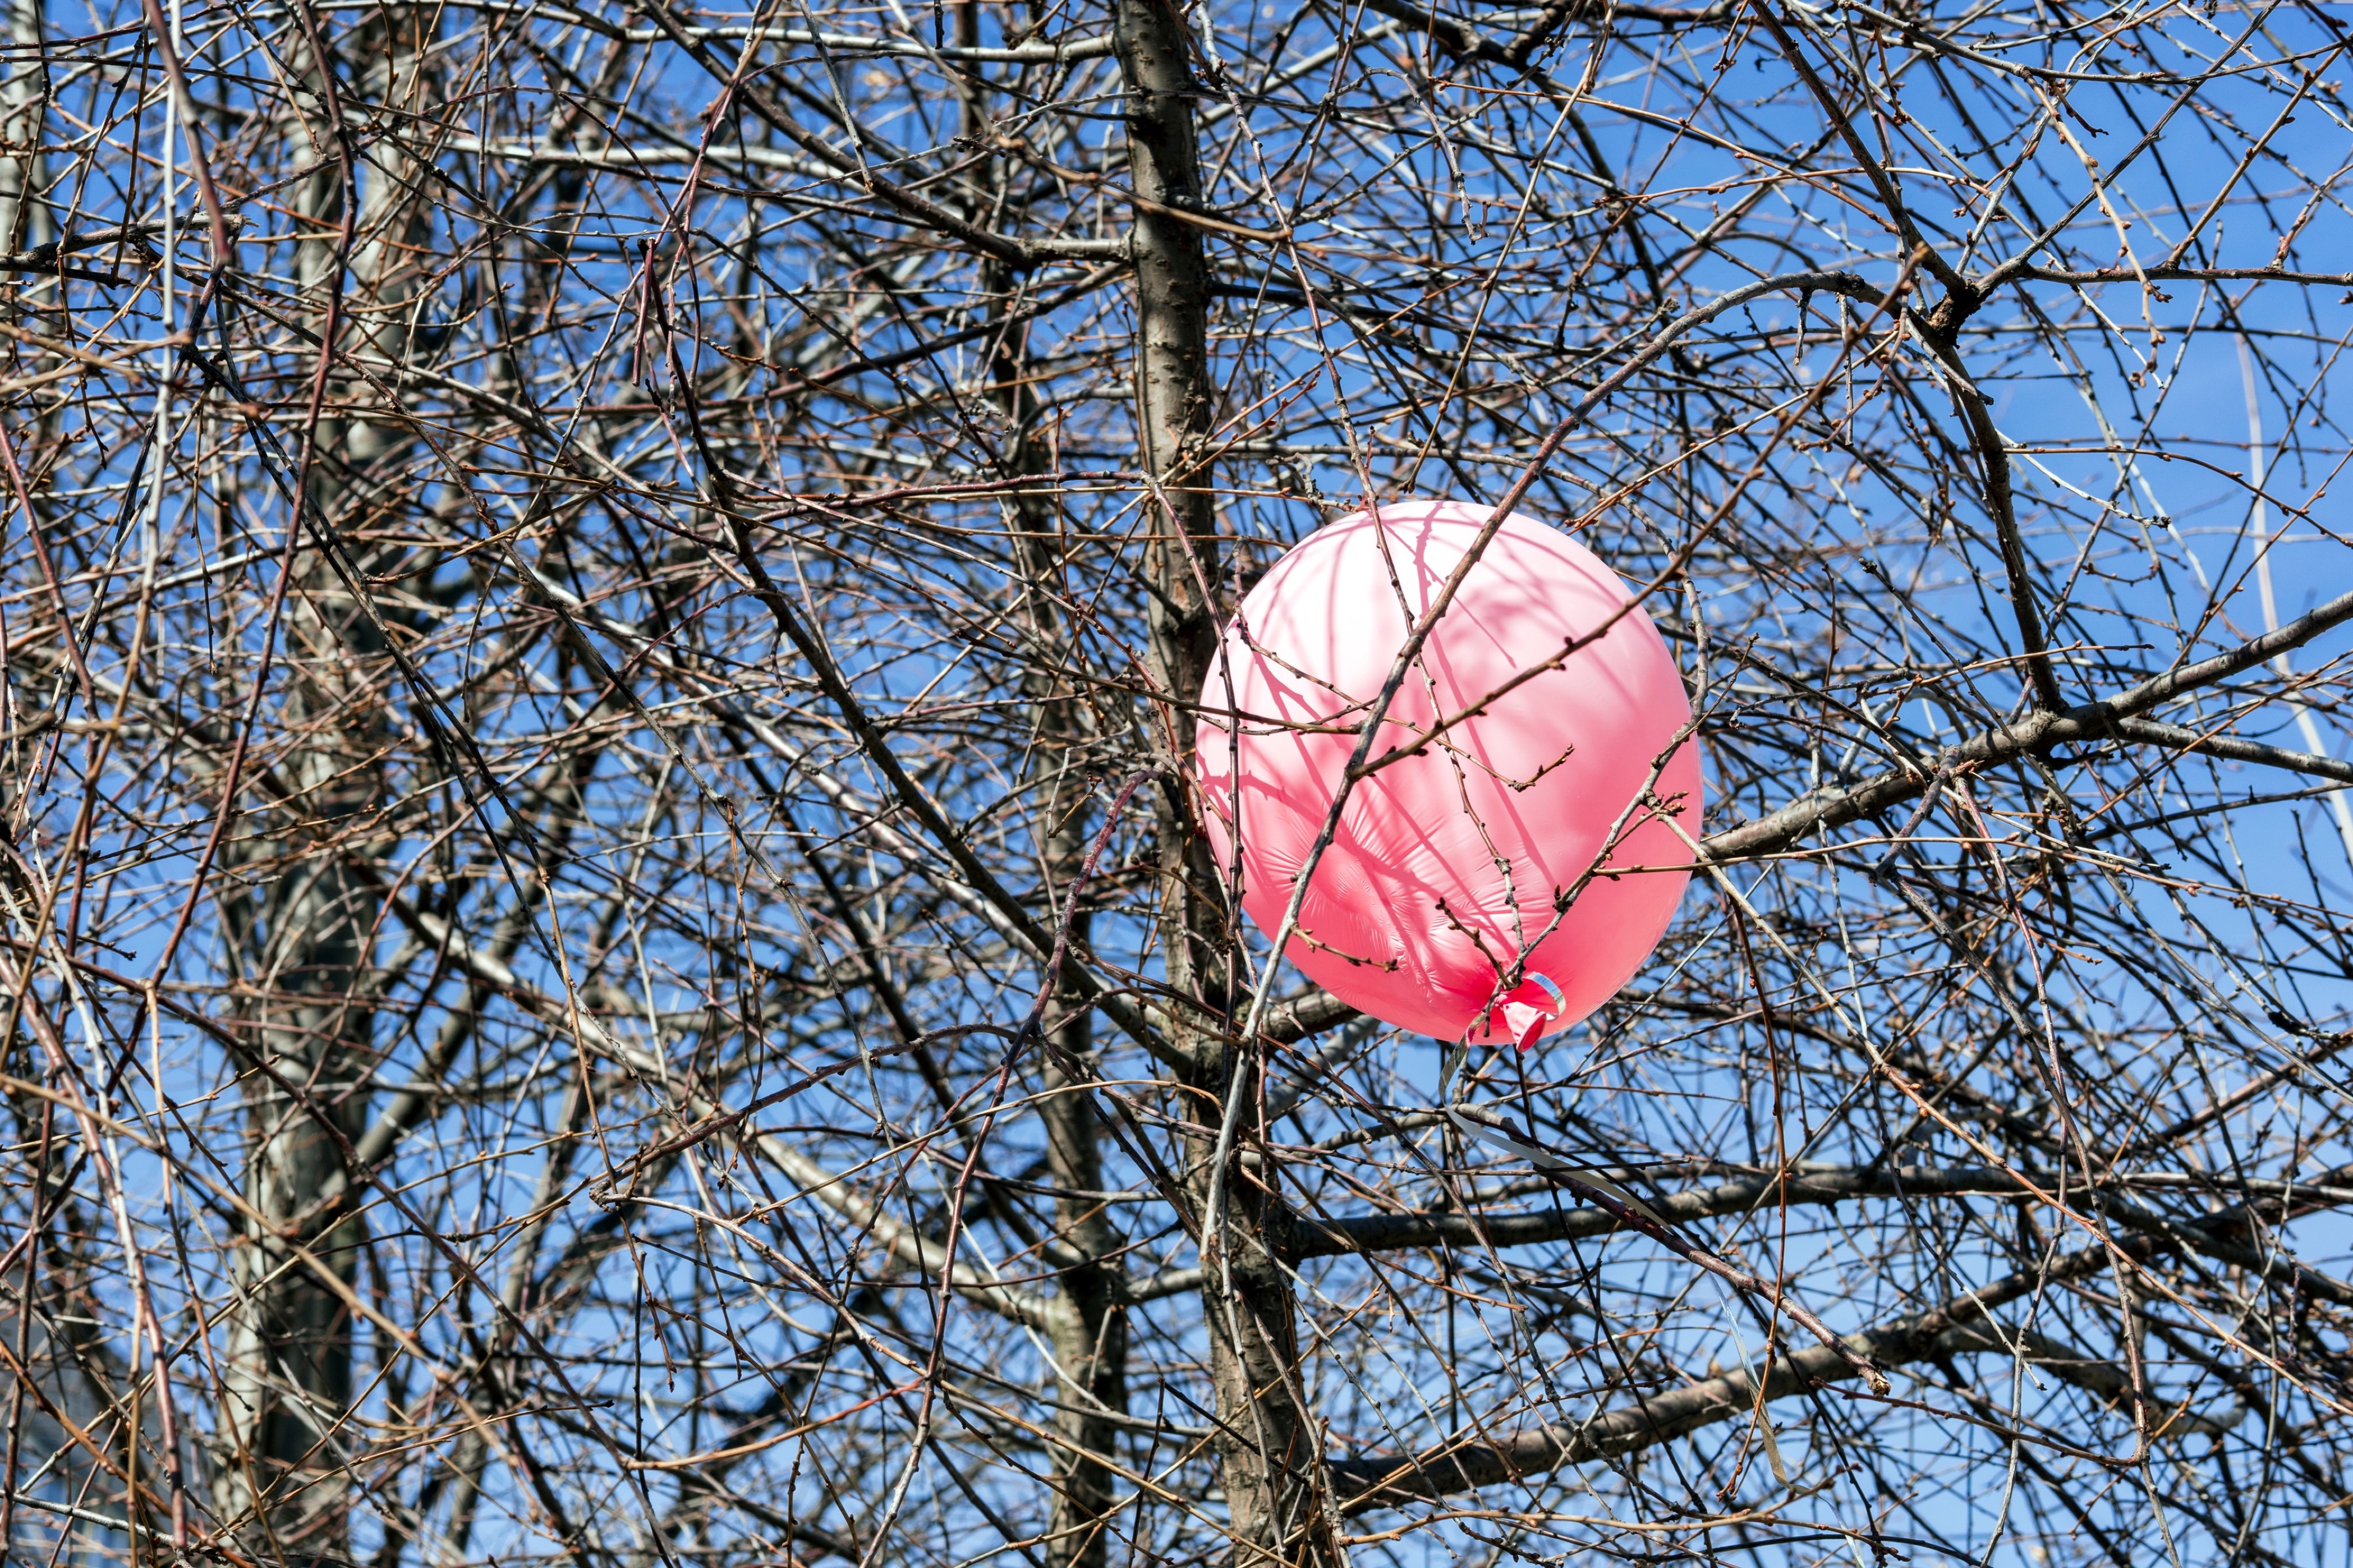 Balloons Are Causing Harm In The Natural World